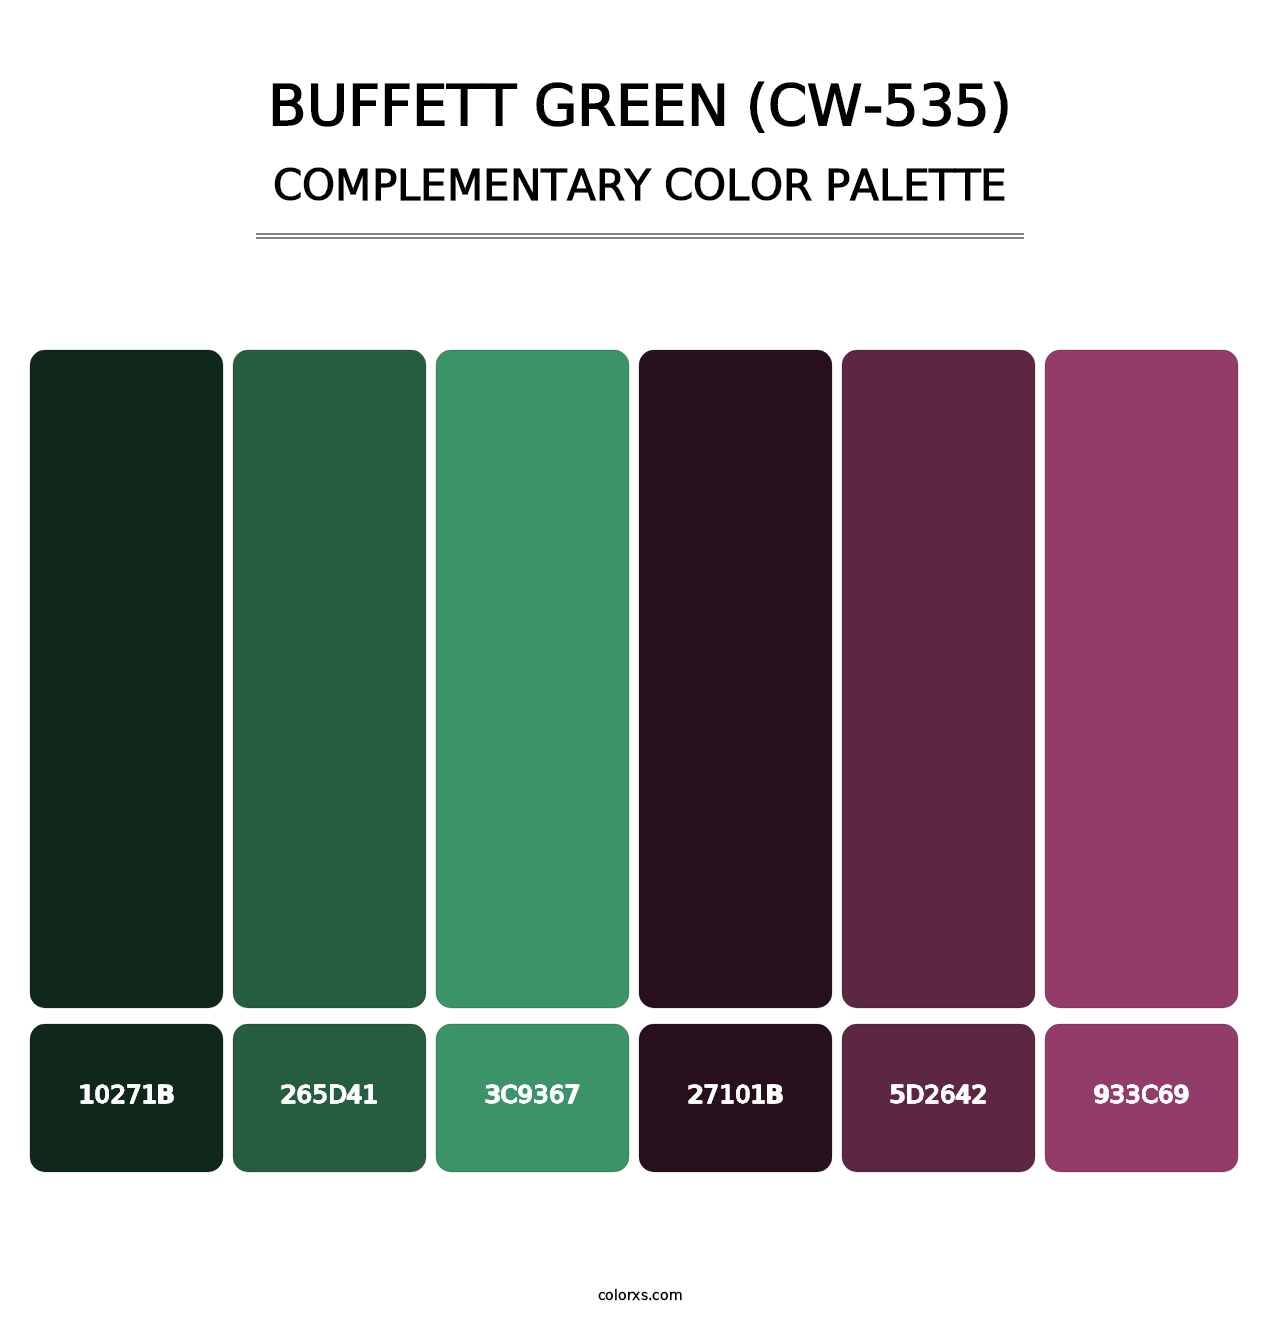 Buffett Green (CW-535) - Complementary Color Palette